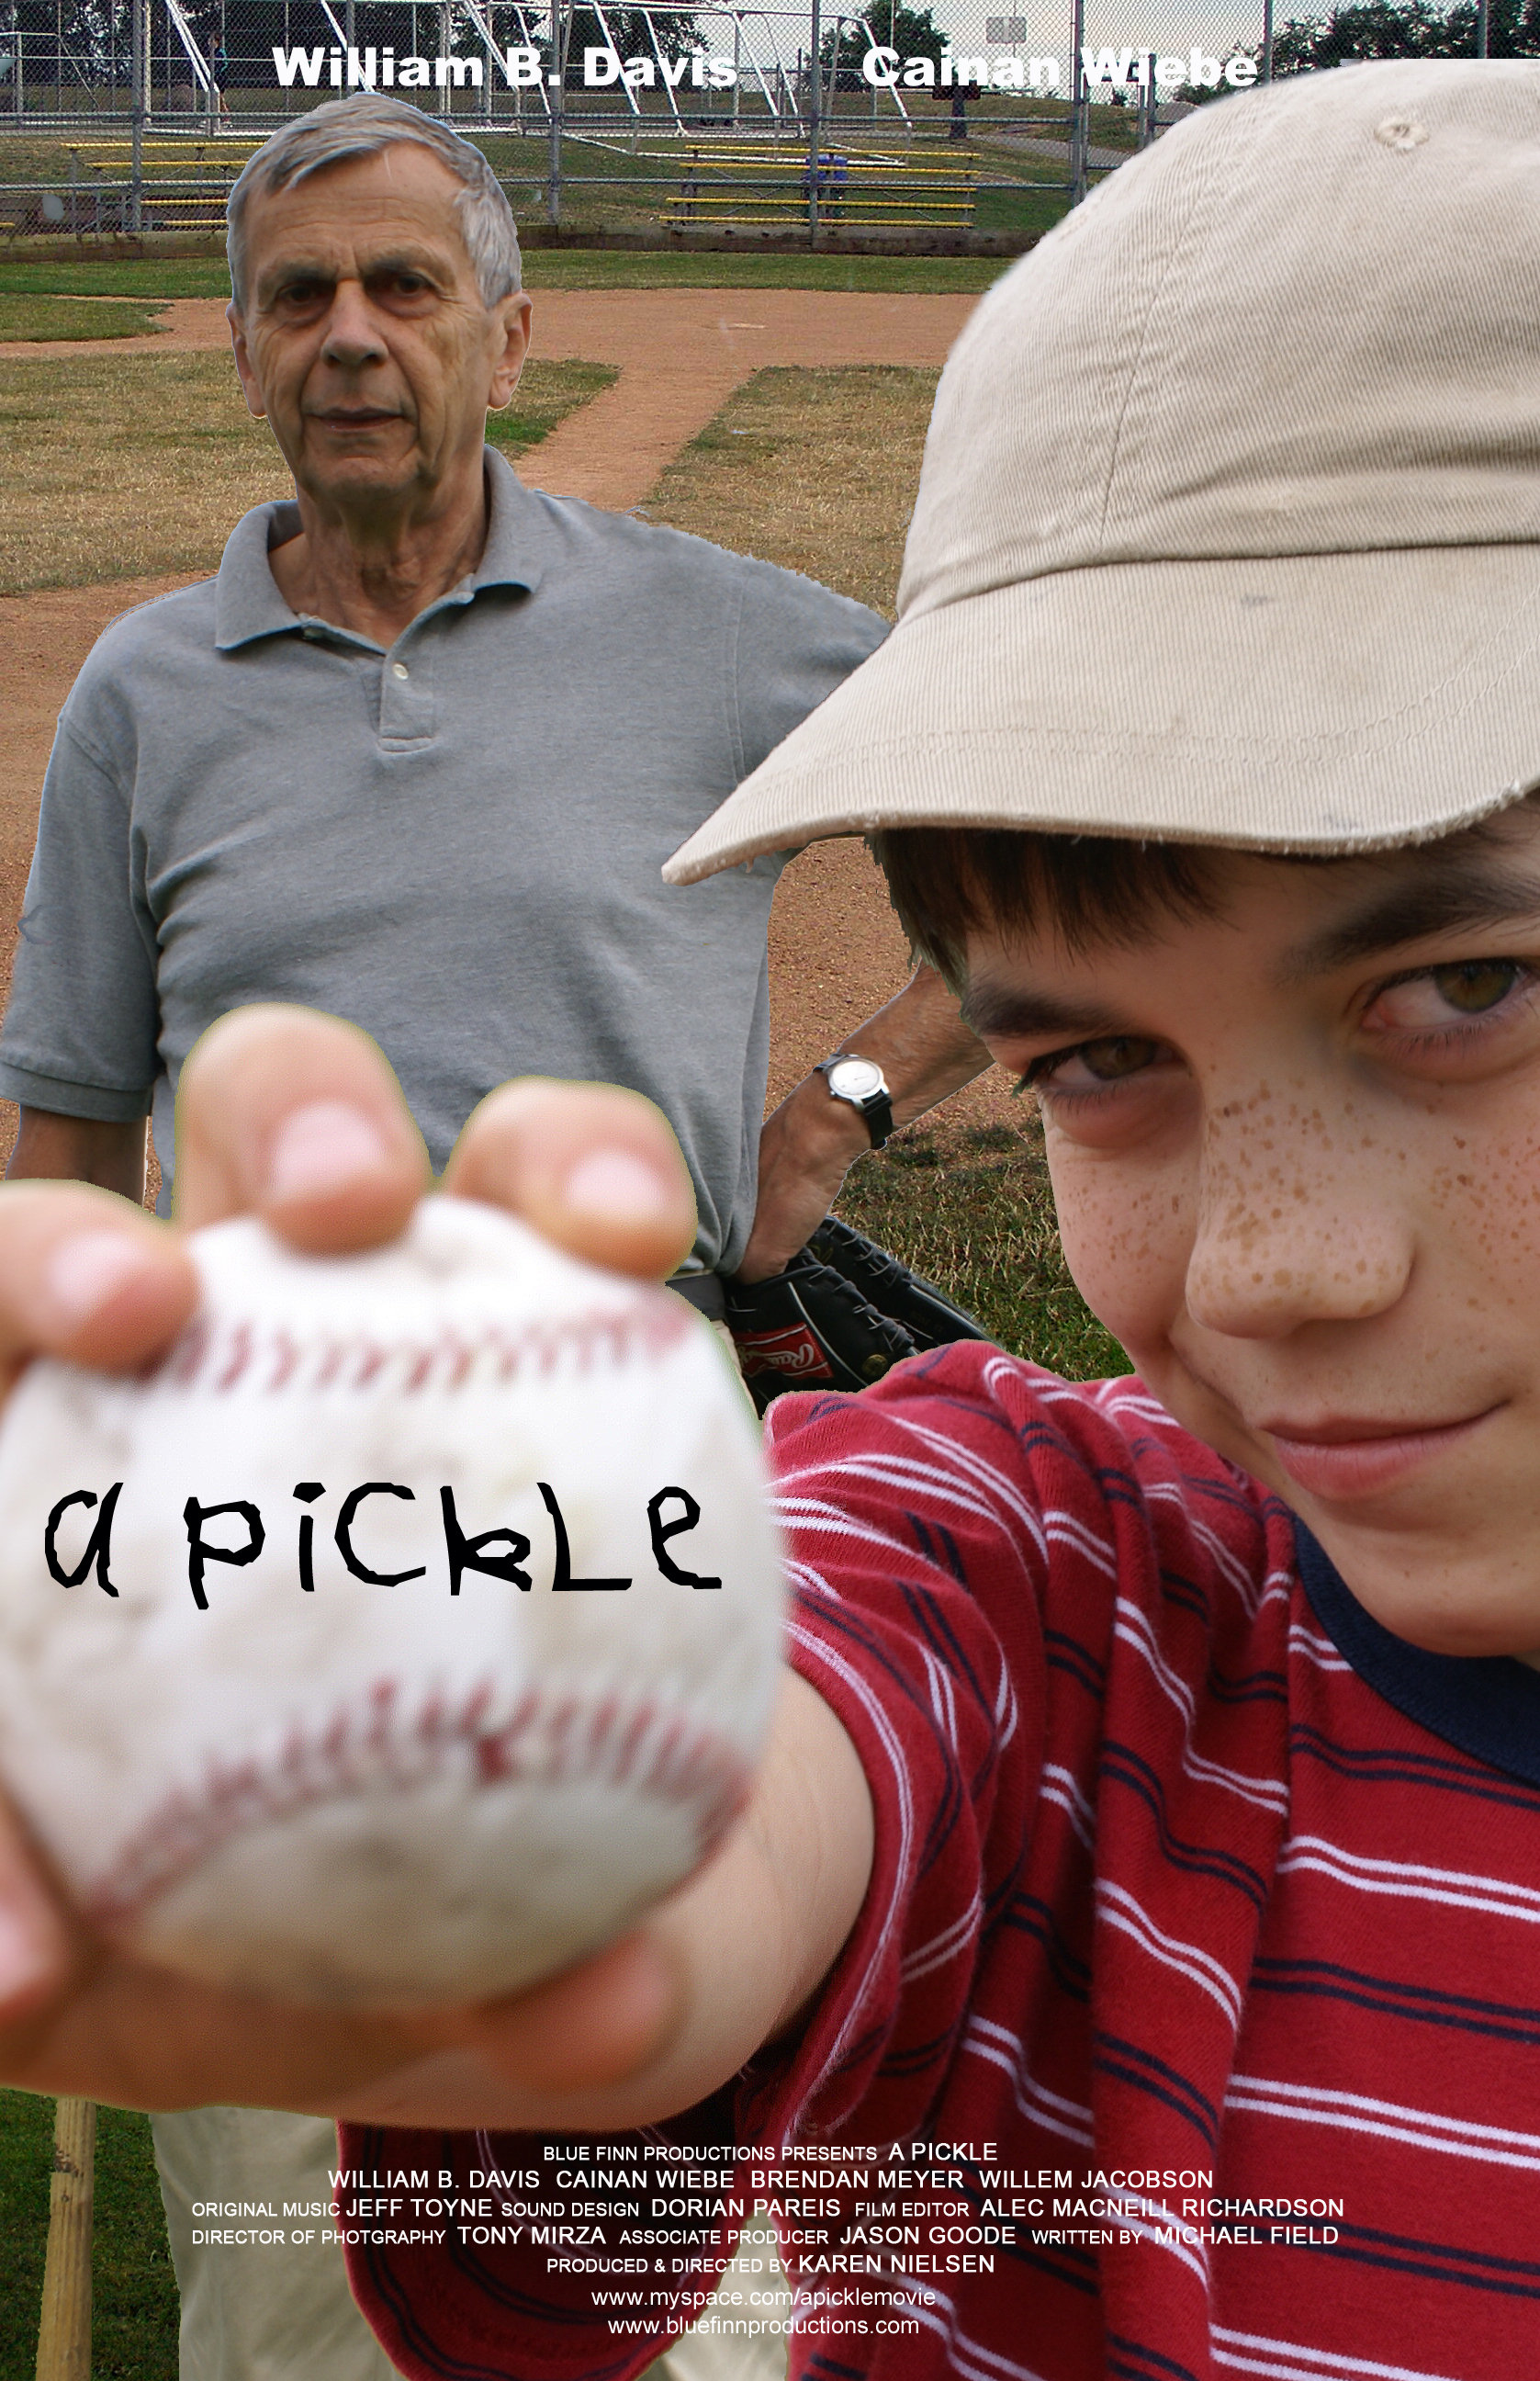 William B. Davis and Cainan Wiebe in A Pickle (2008)